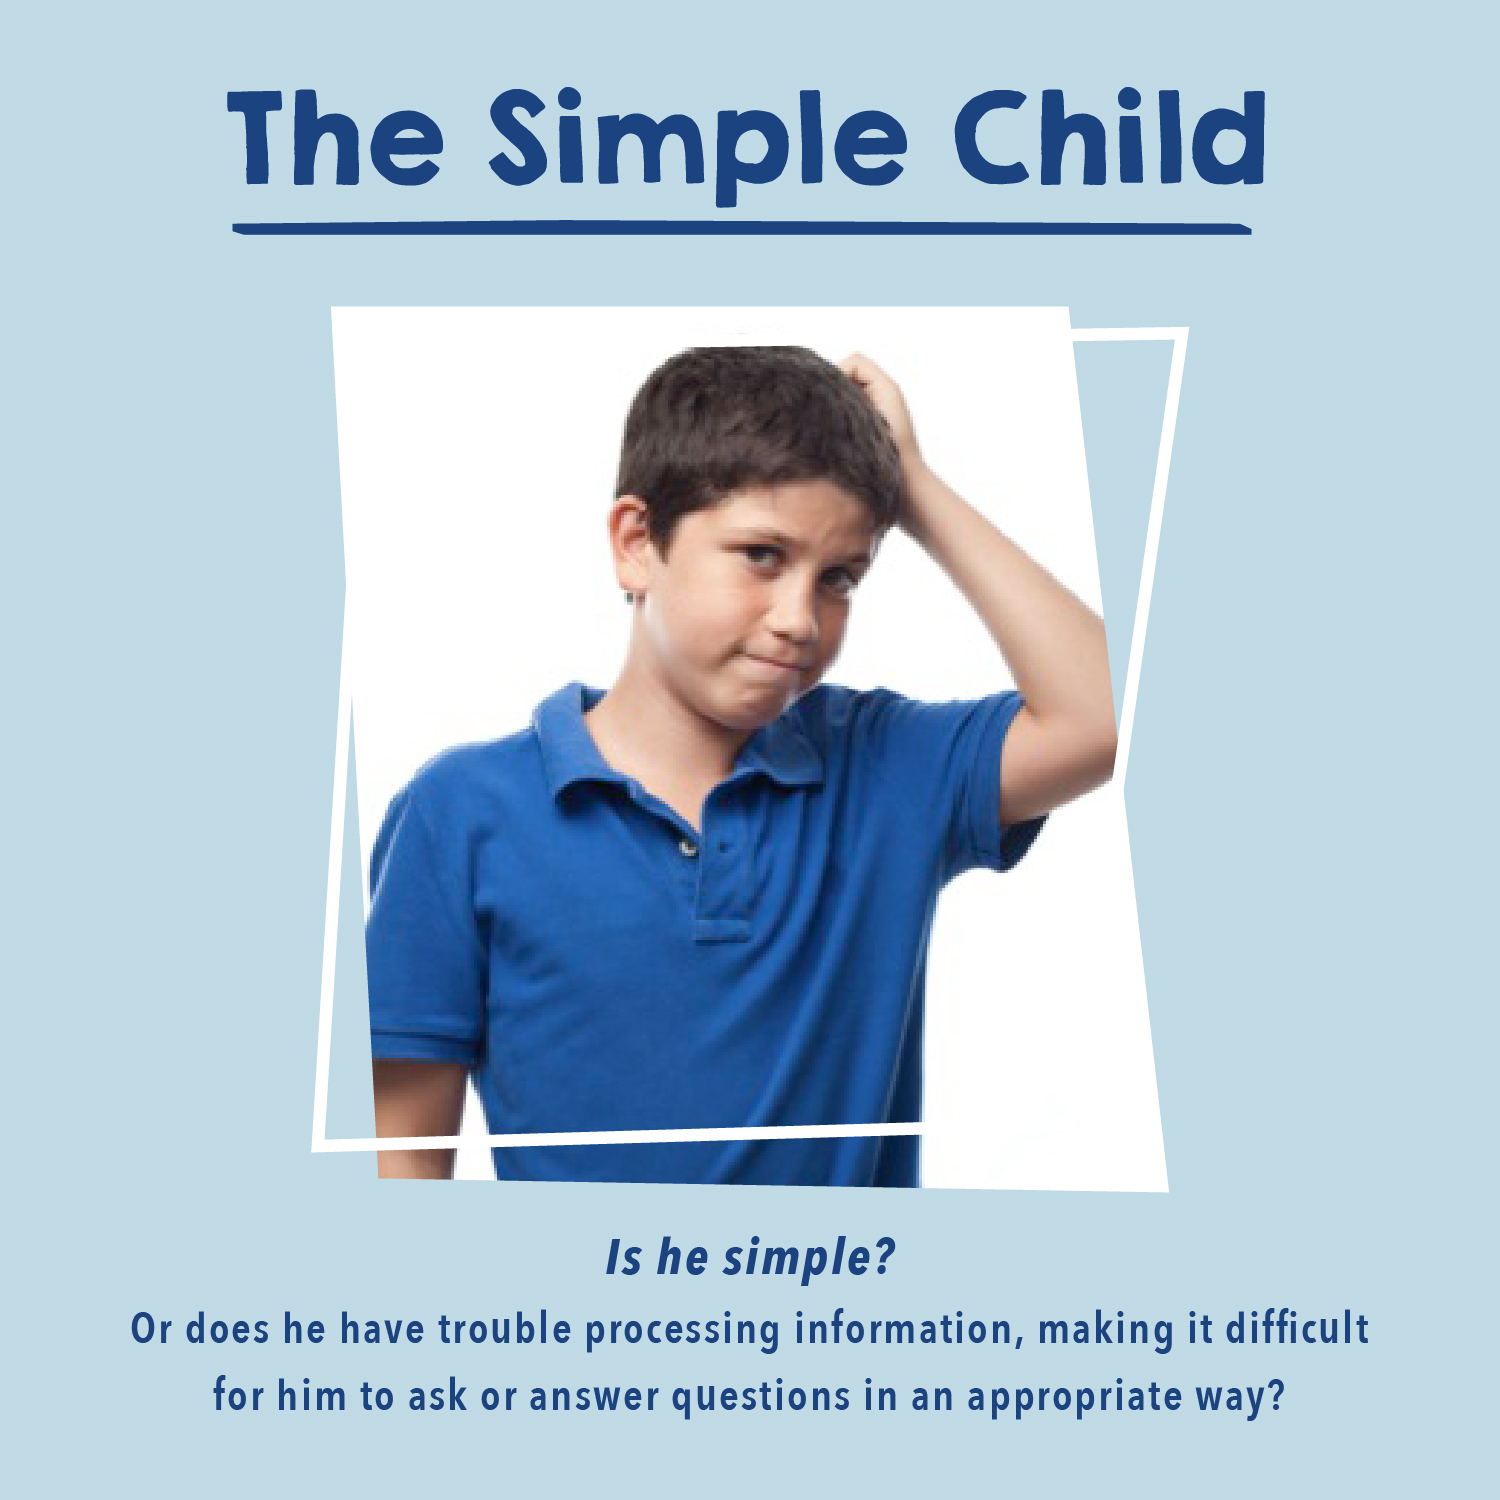 The Simple Child